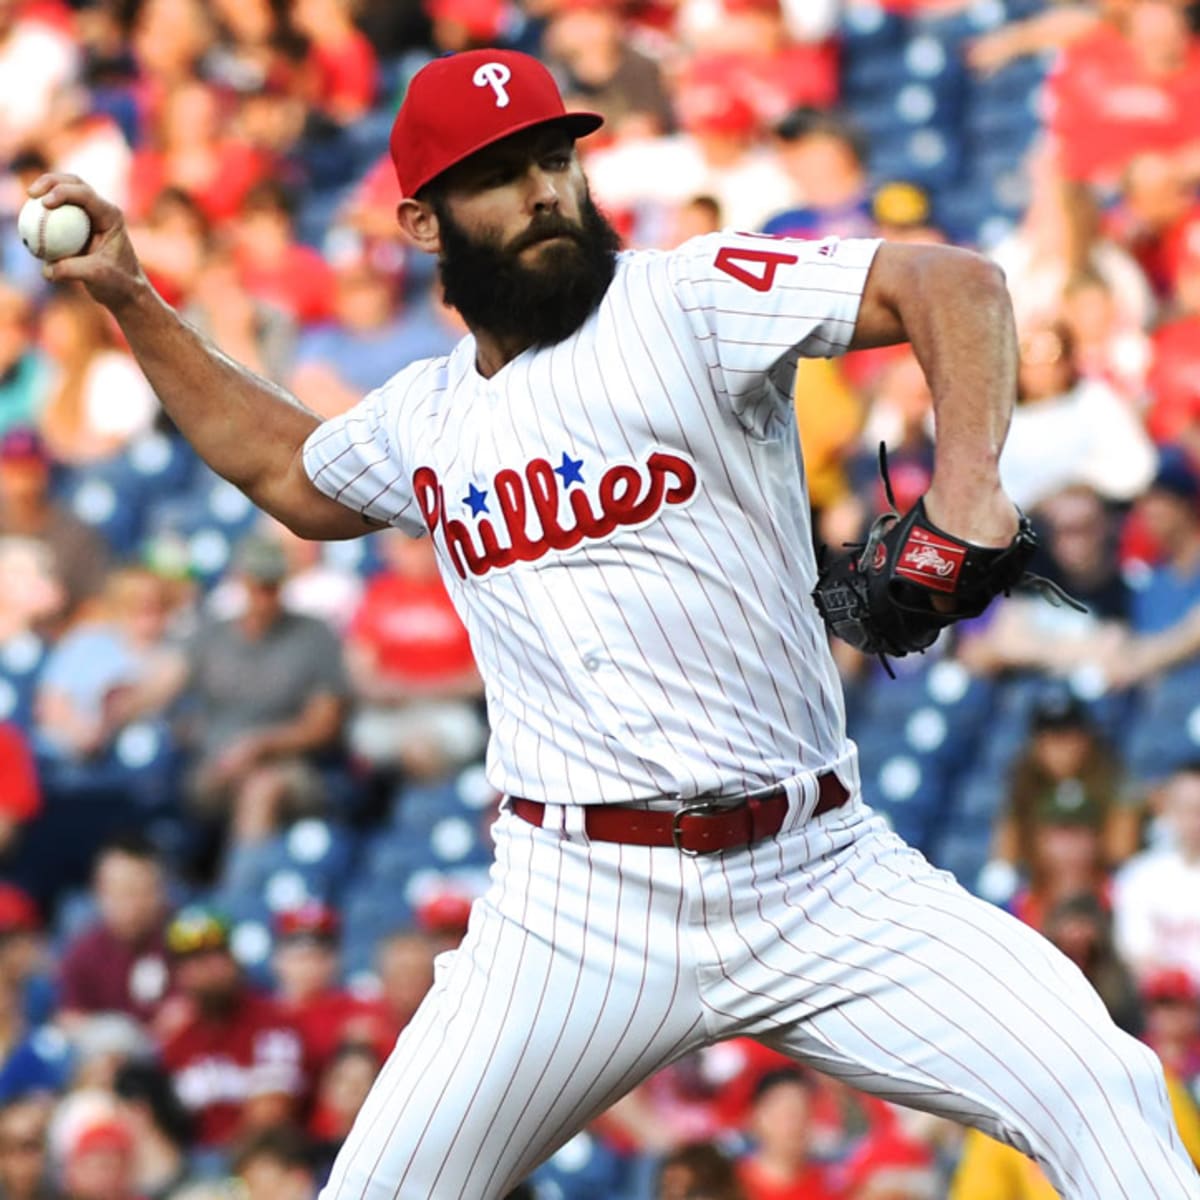 Phillies: Jake Arrieta looks ready to go in latest video